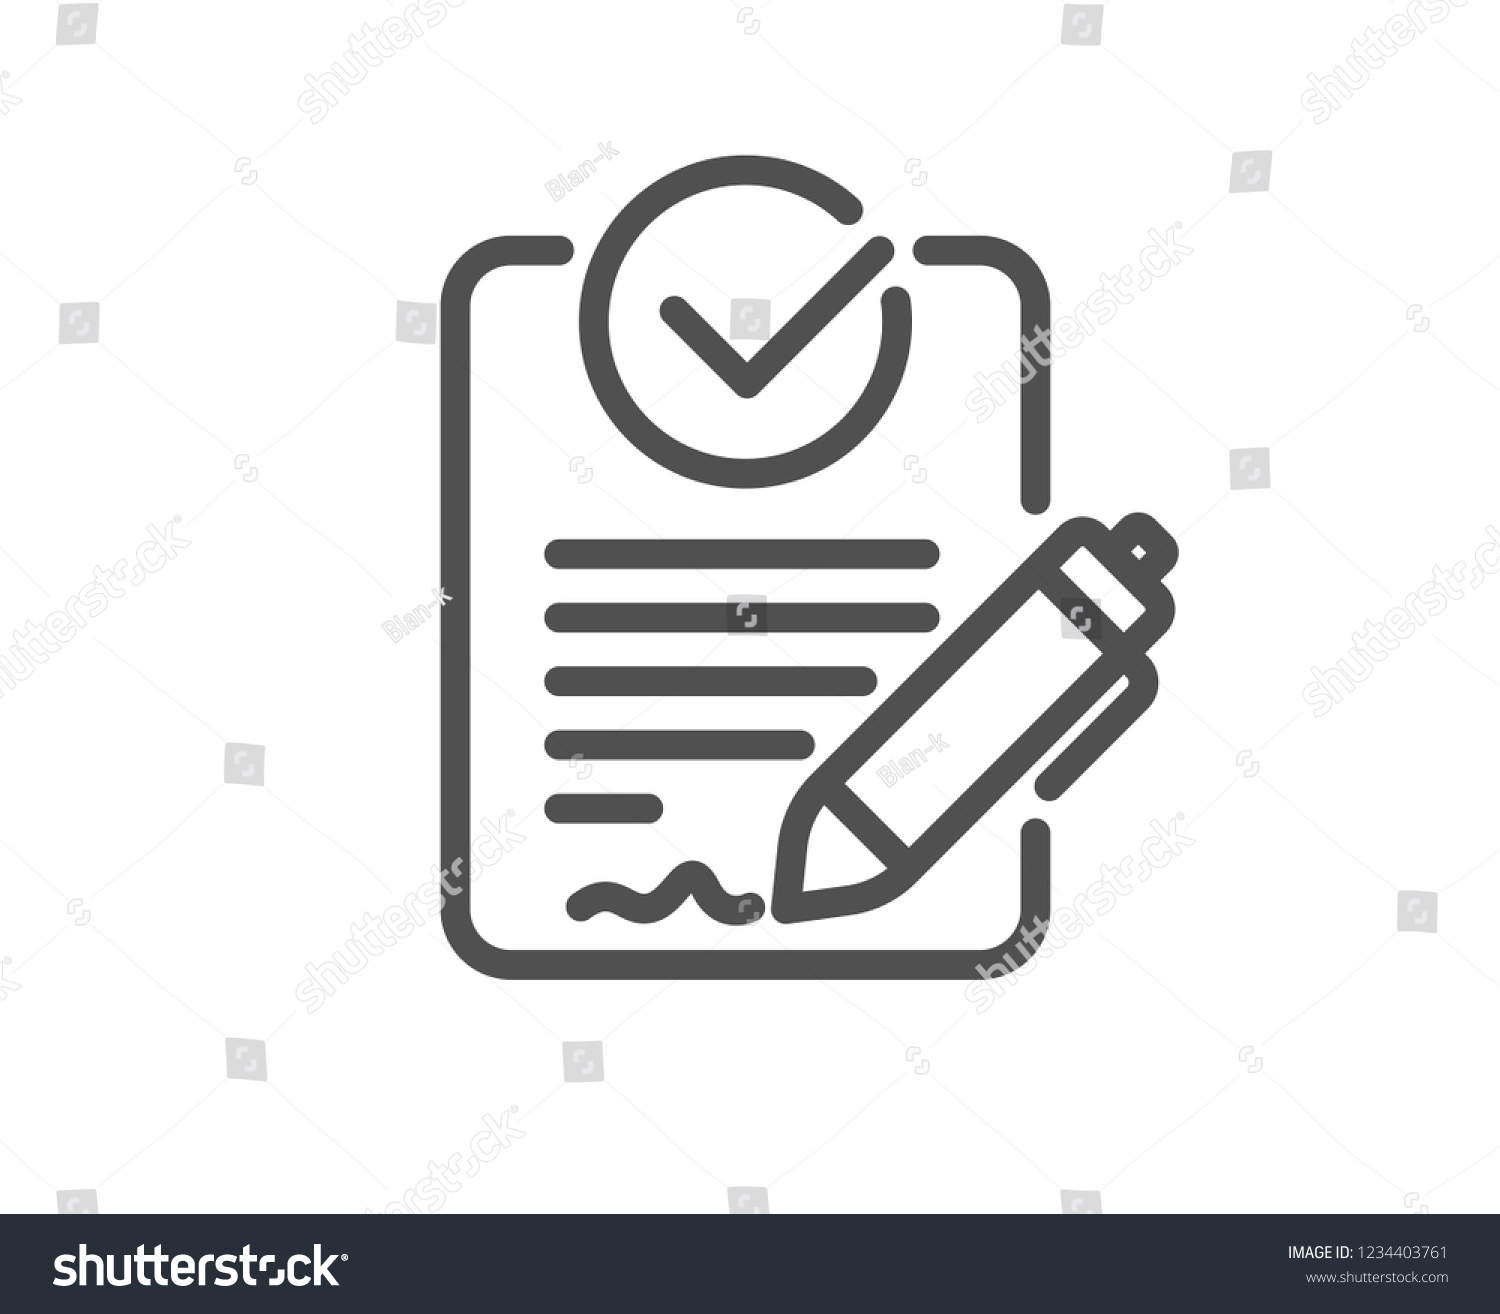 Rfp Line Icon Request Proposal Sign Stock Illustration 1234403761 ...